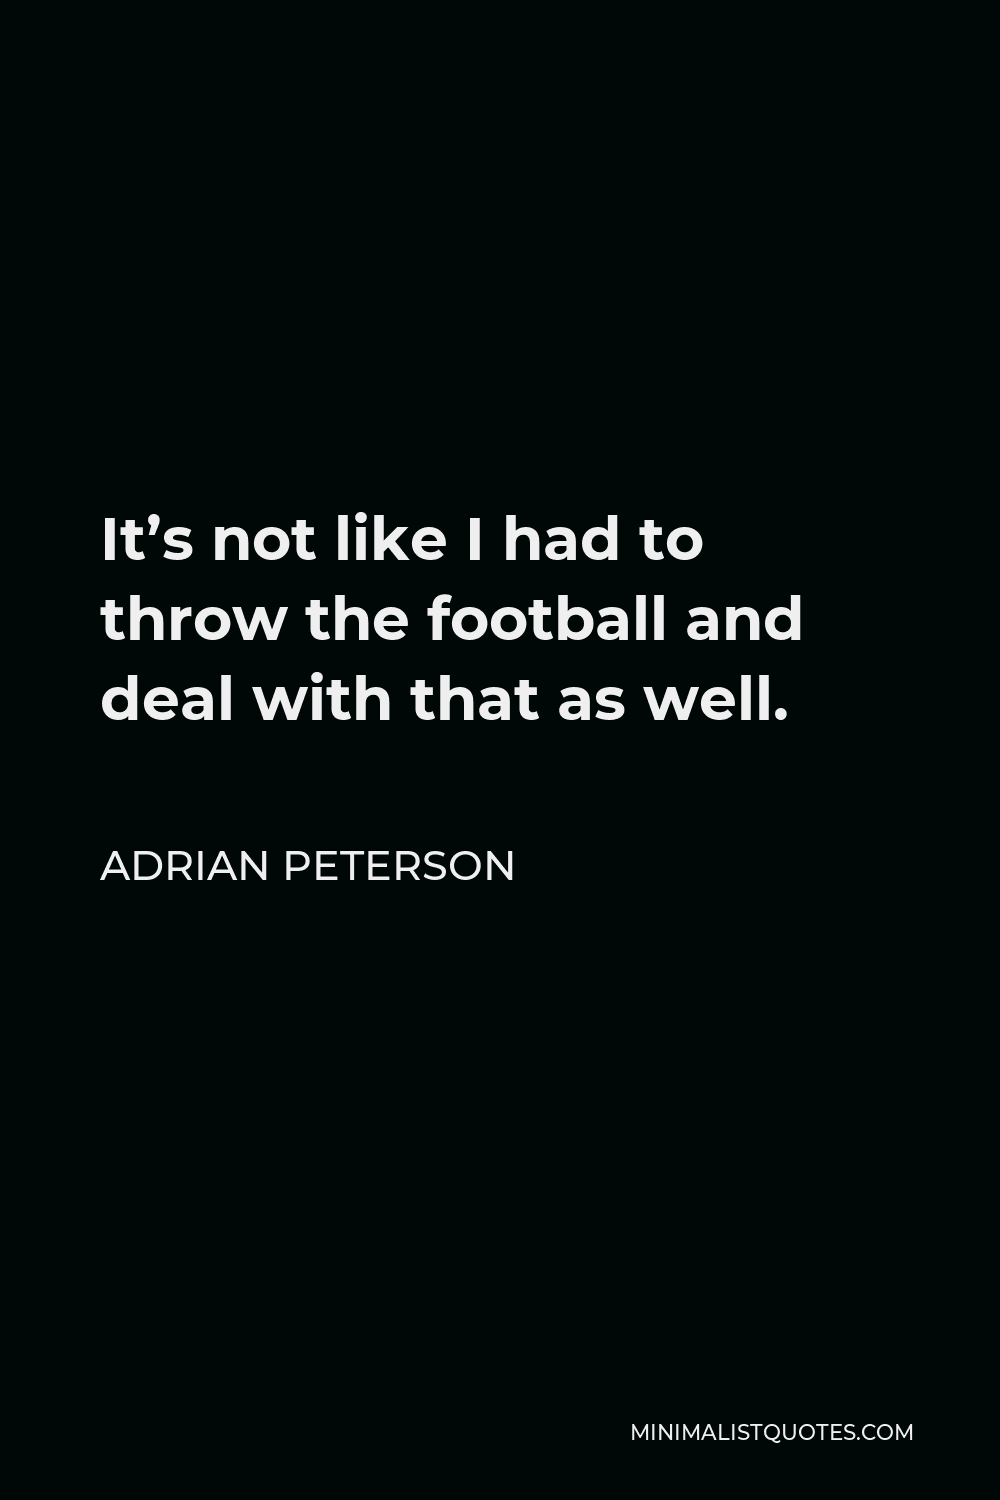 Adrian Peterson Quote - It’s not like I had to throw the football and deal with that as well.